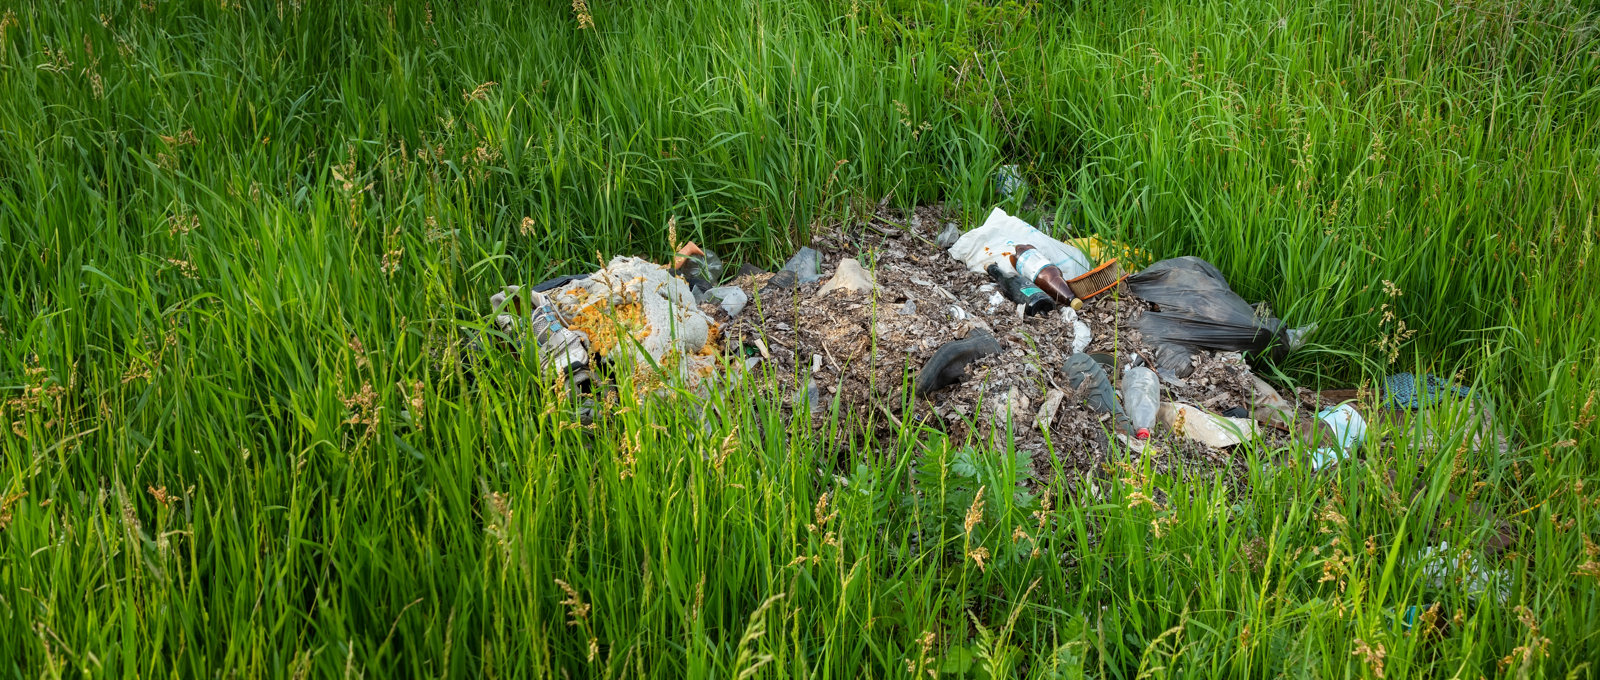 Photo of rubbish and waste dumped in the middle of a grassy area